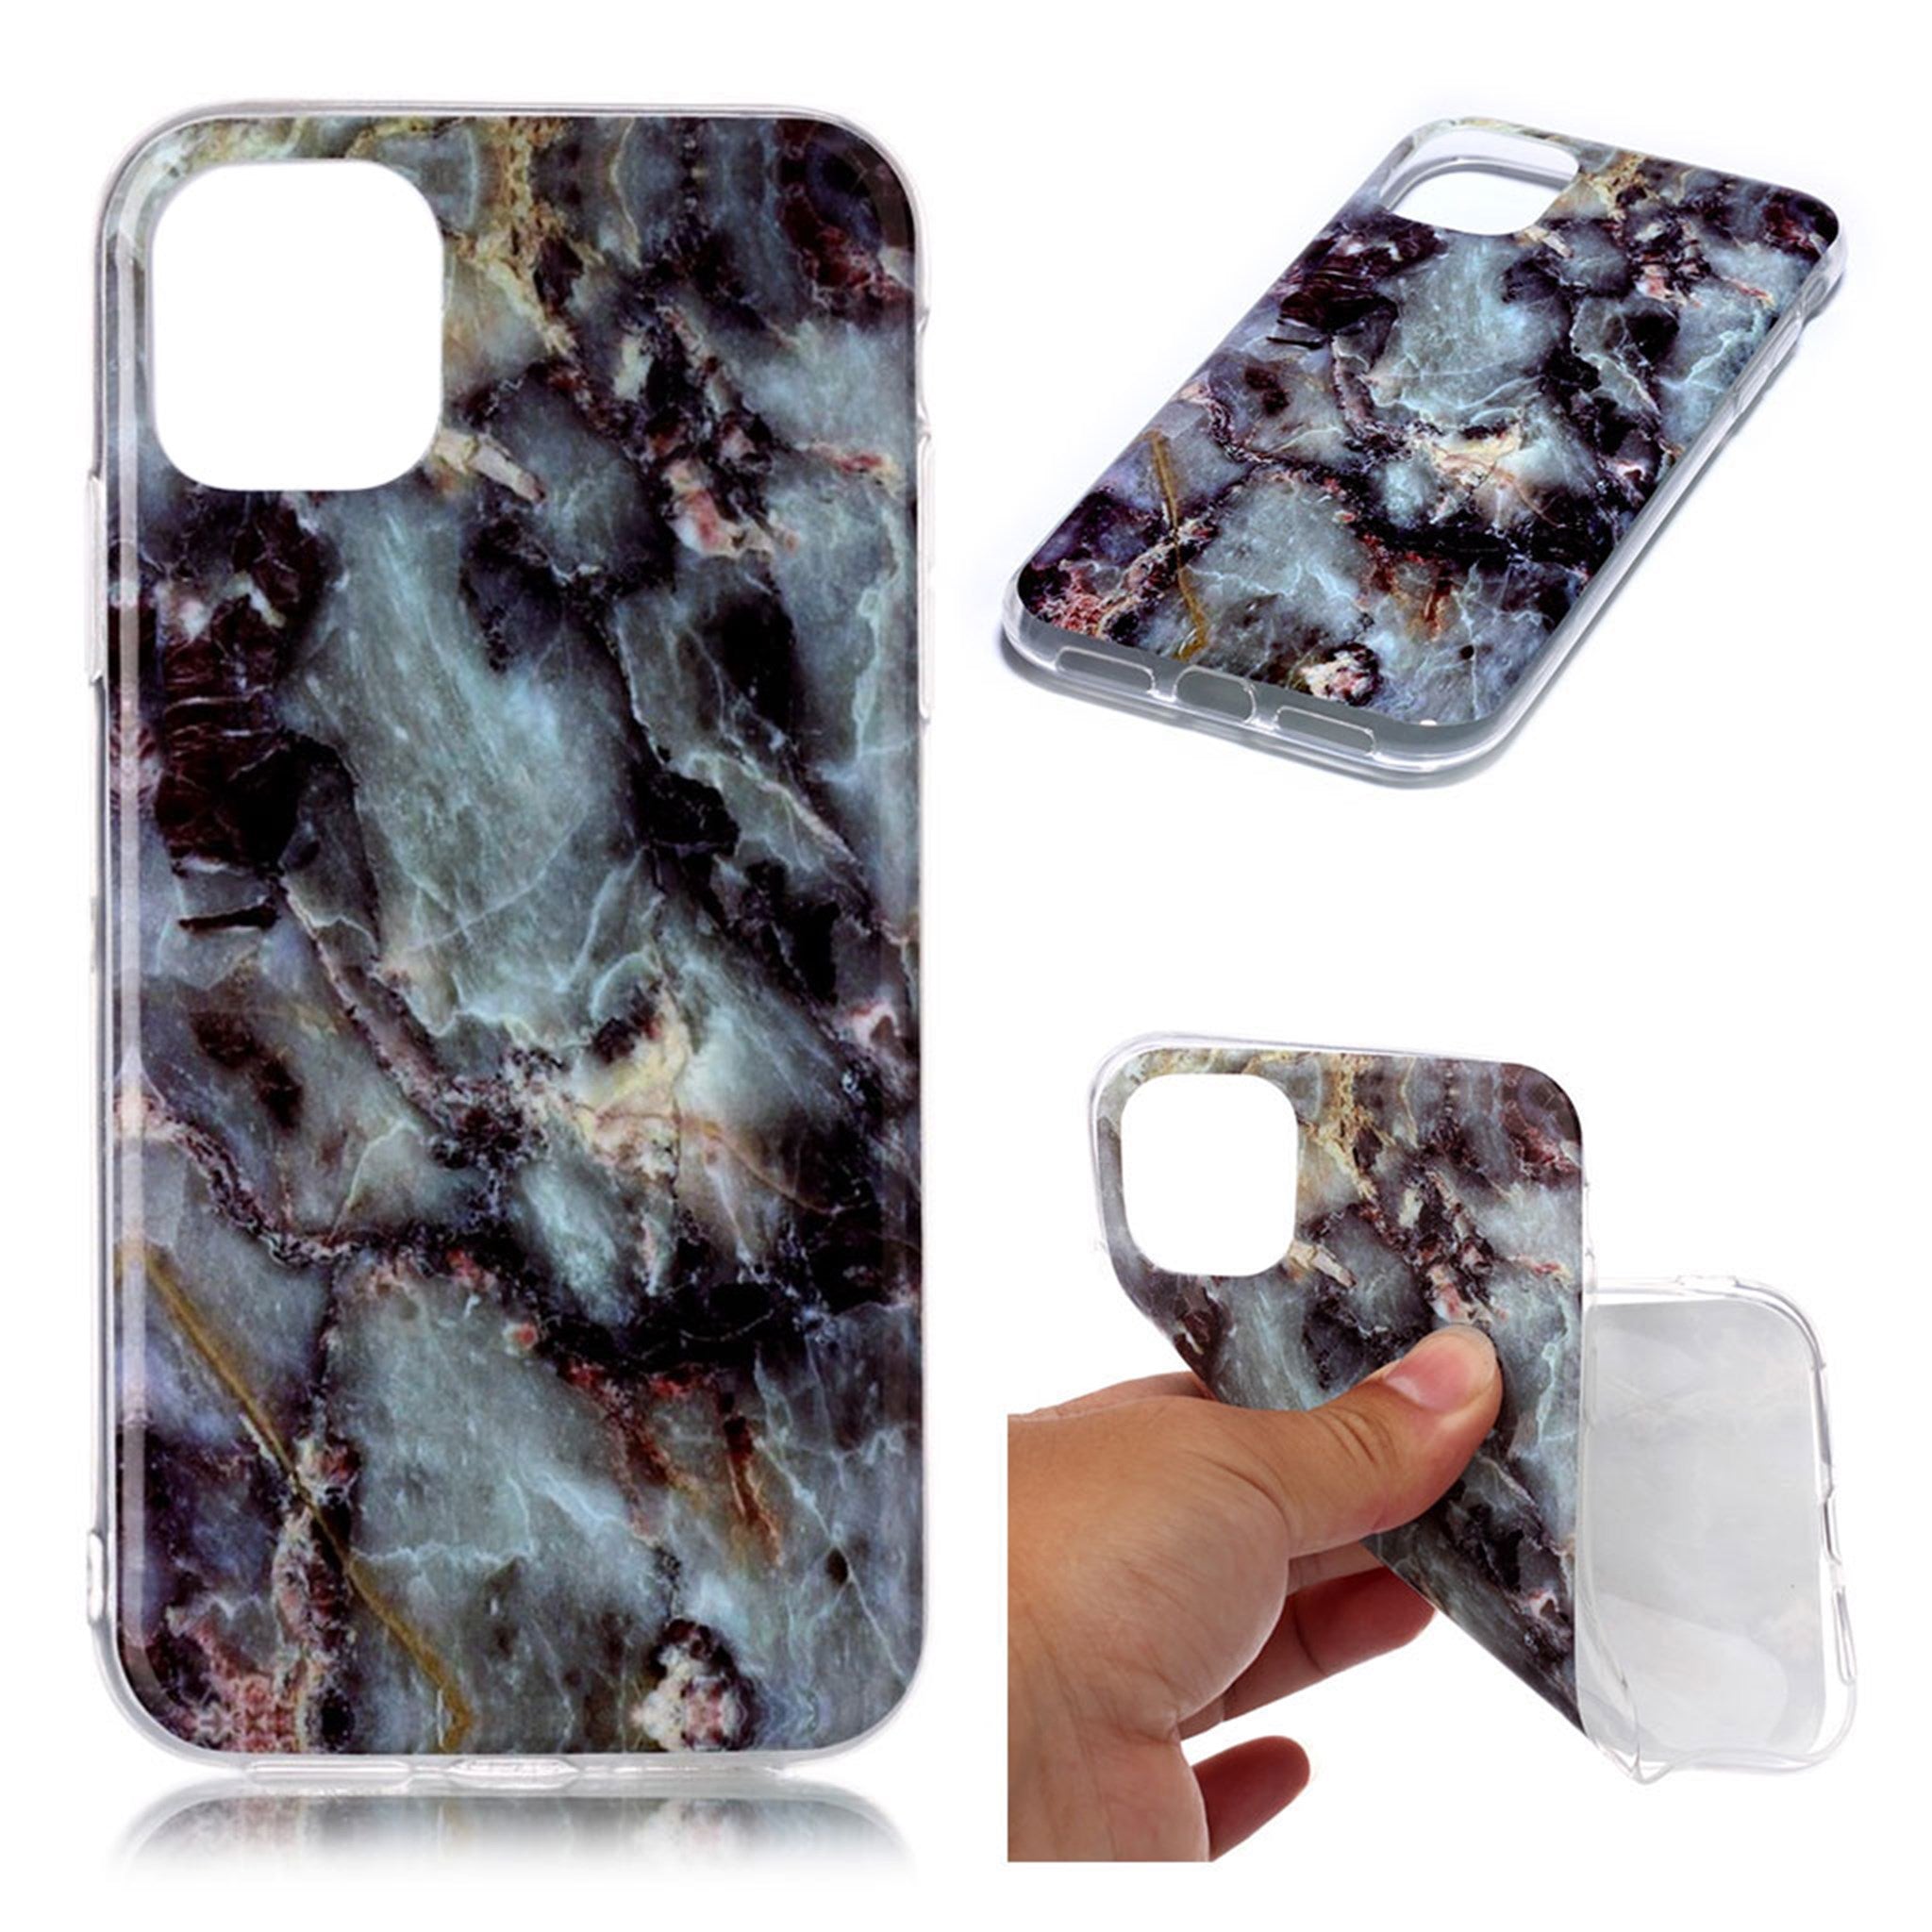 Marble iPhone 11 Pro case - Teal / Black Marble